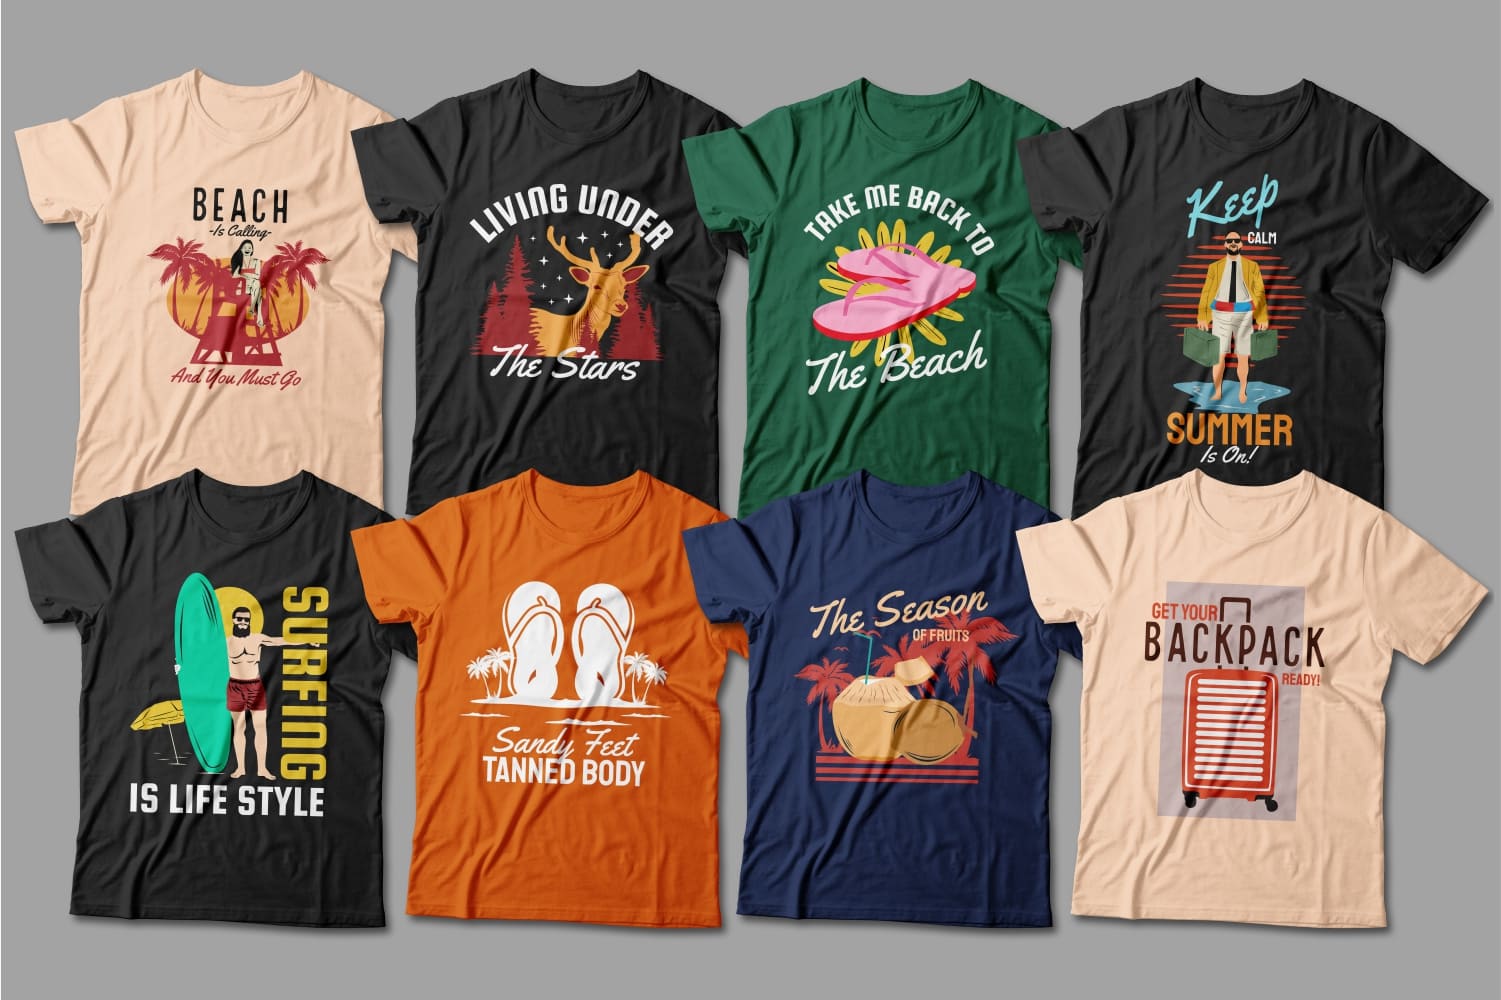 Summer T-shirts with different designs and prints.